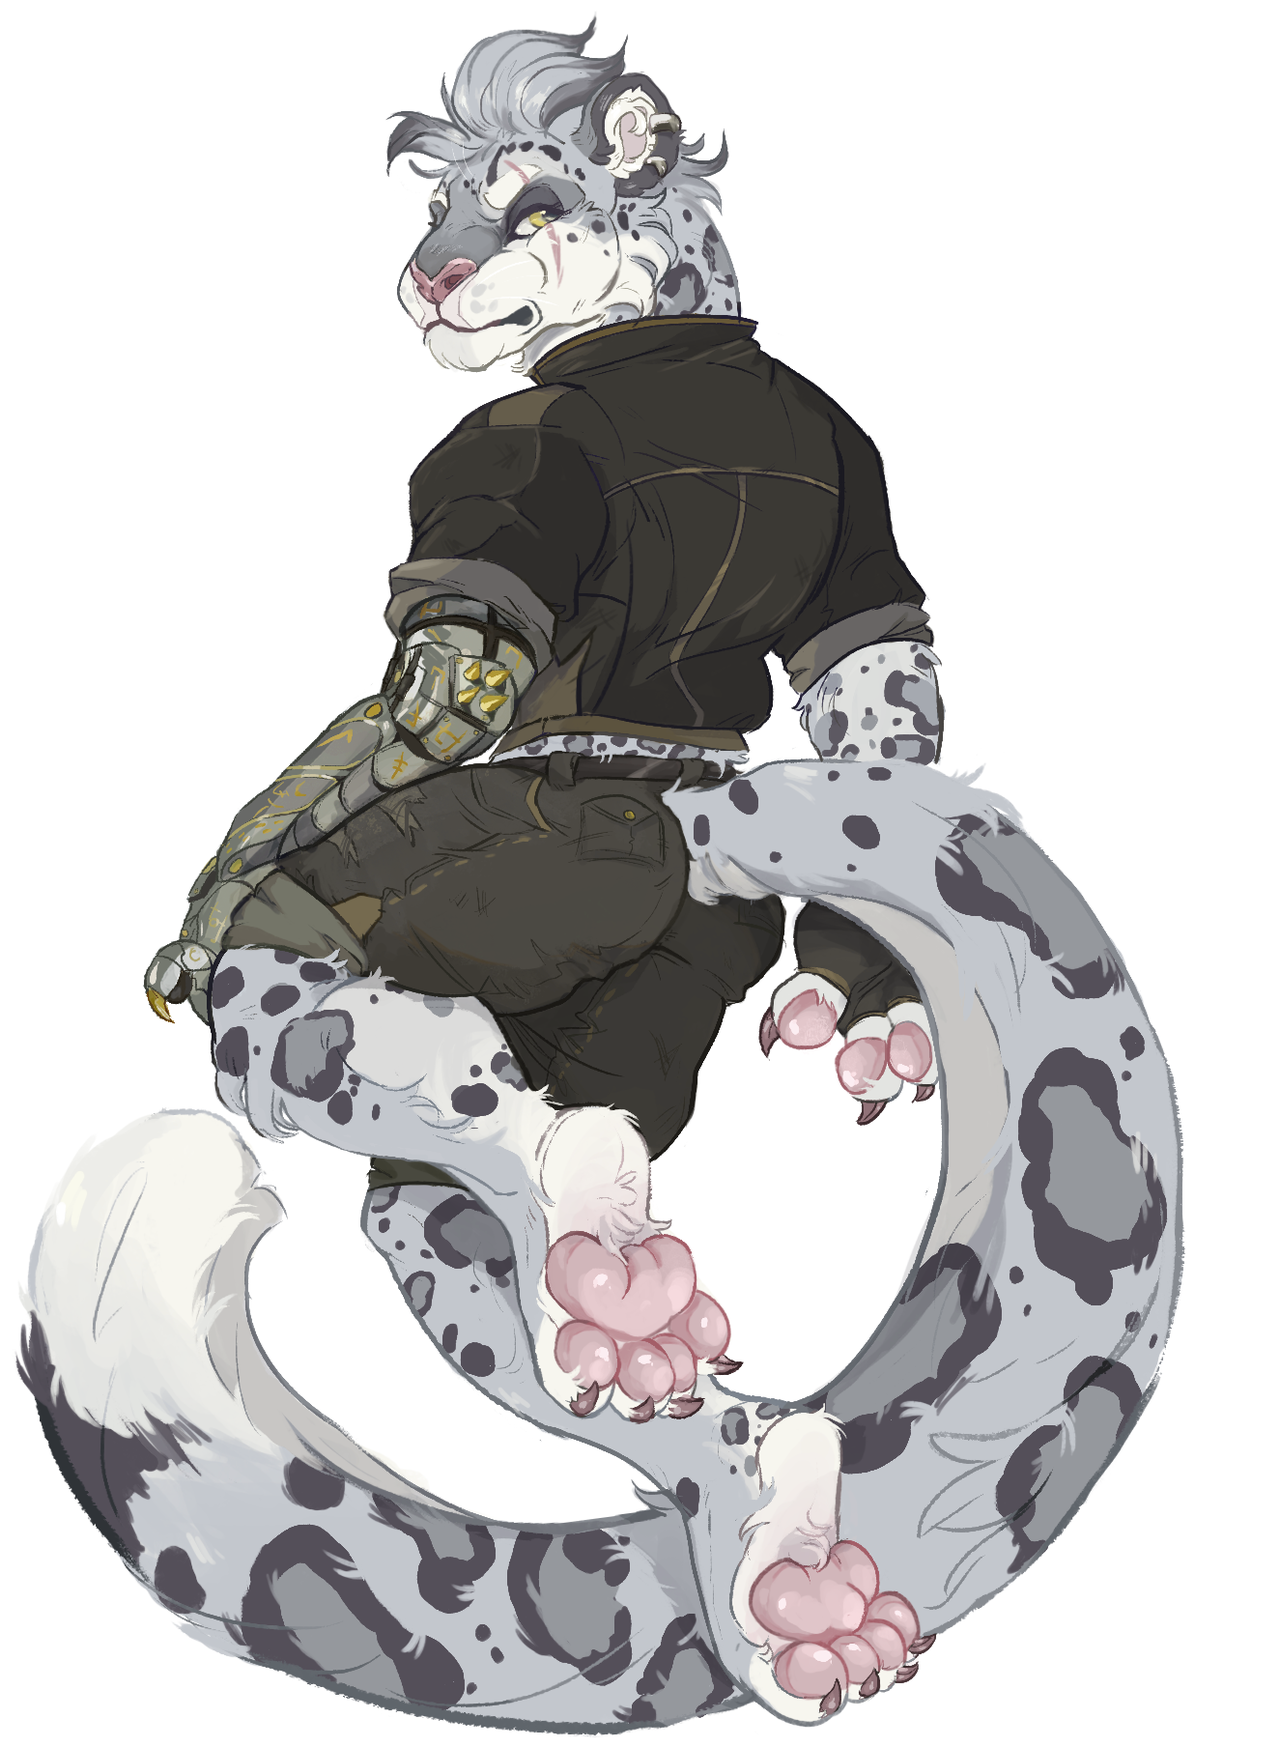 icecream-gh0st:Snow leopard Rocco! A full body Commission for HeyitsHeaps on Twitter